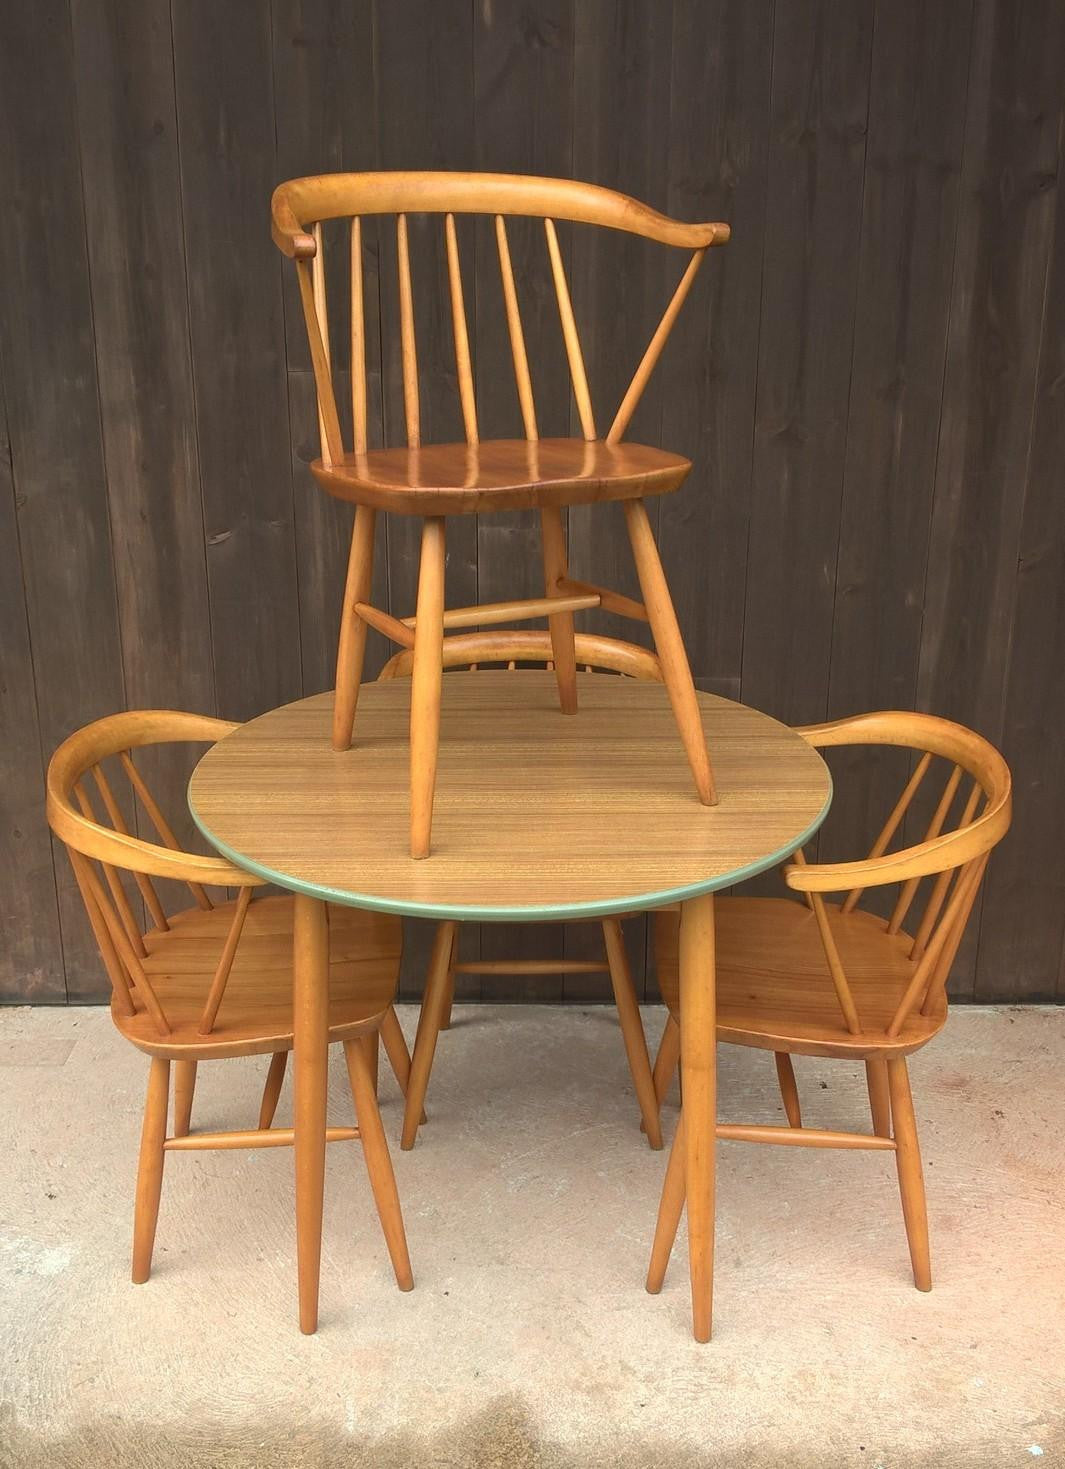 Rare (Ercol Style) Retro Table And 4 Chairs Made By Centa.